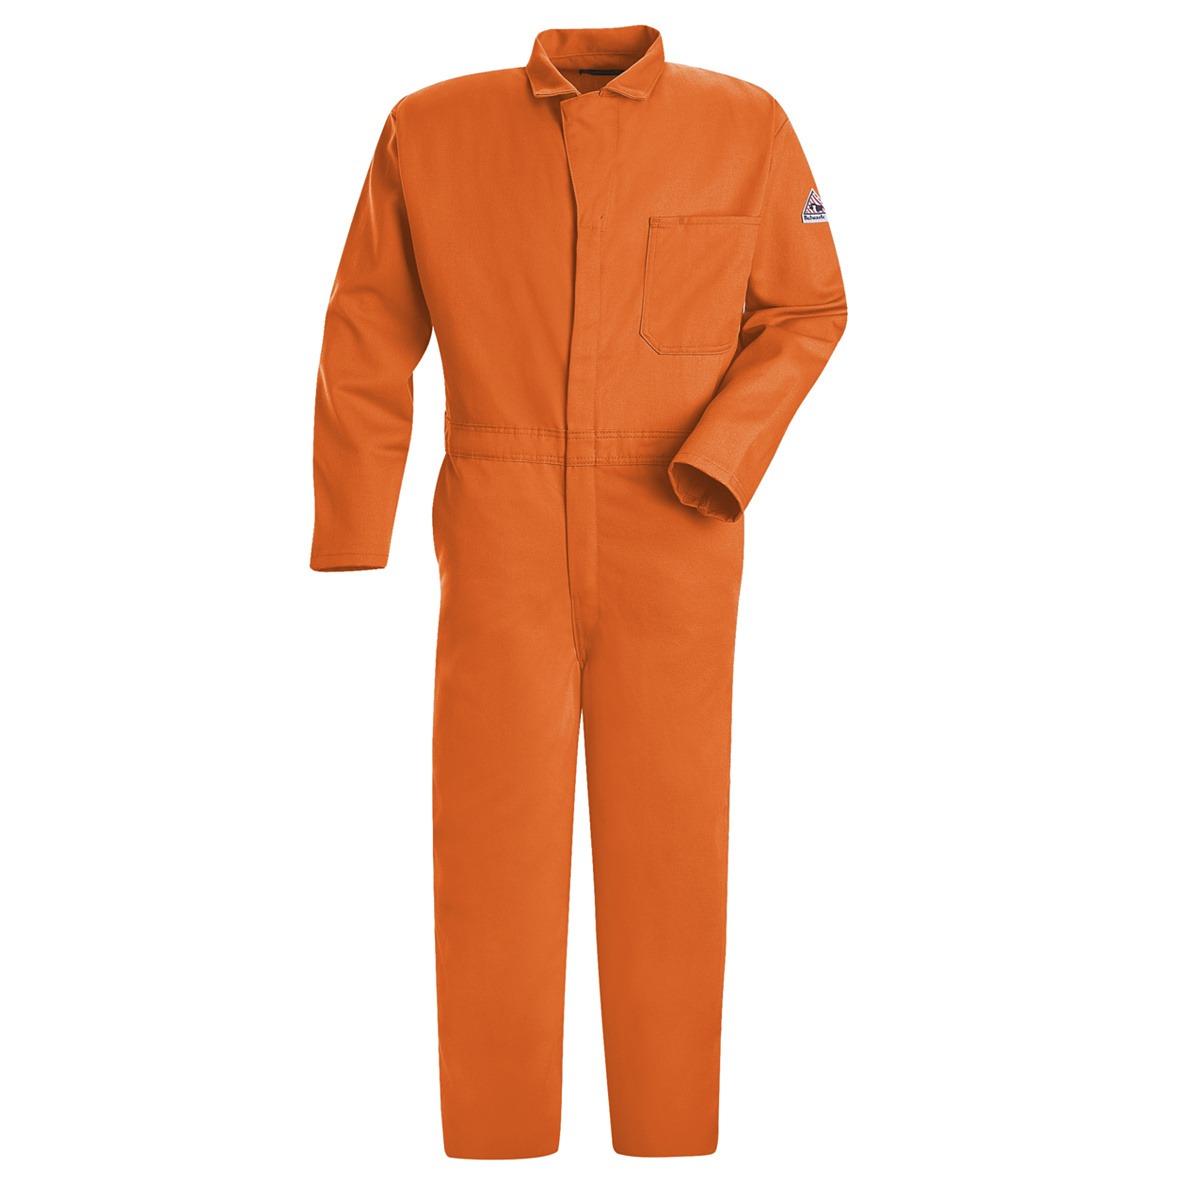 Bulwark® 58 Tall Orange EXCEL FR® Twill Cotton Flame Resistant Coveralls With Zipper Front Closure